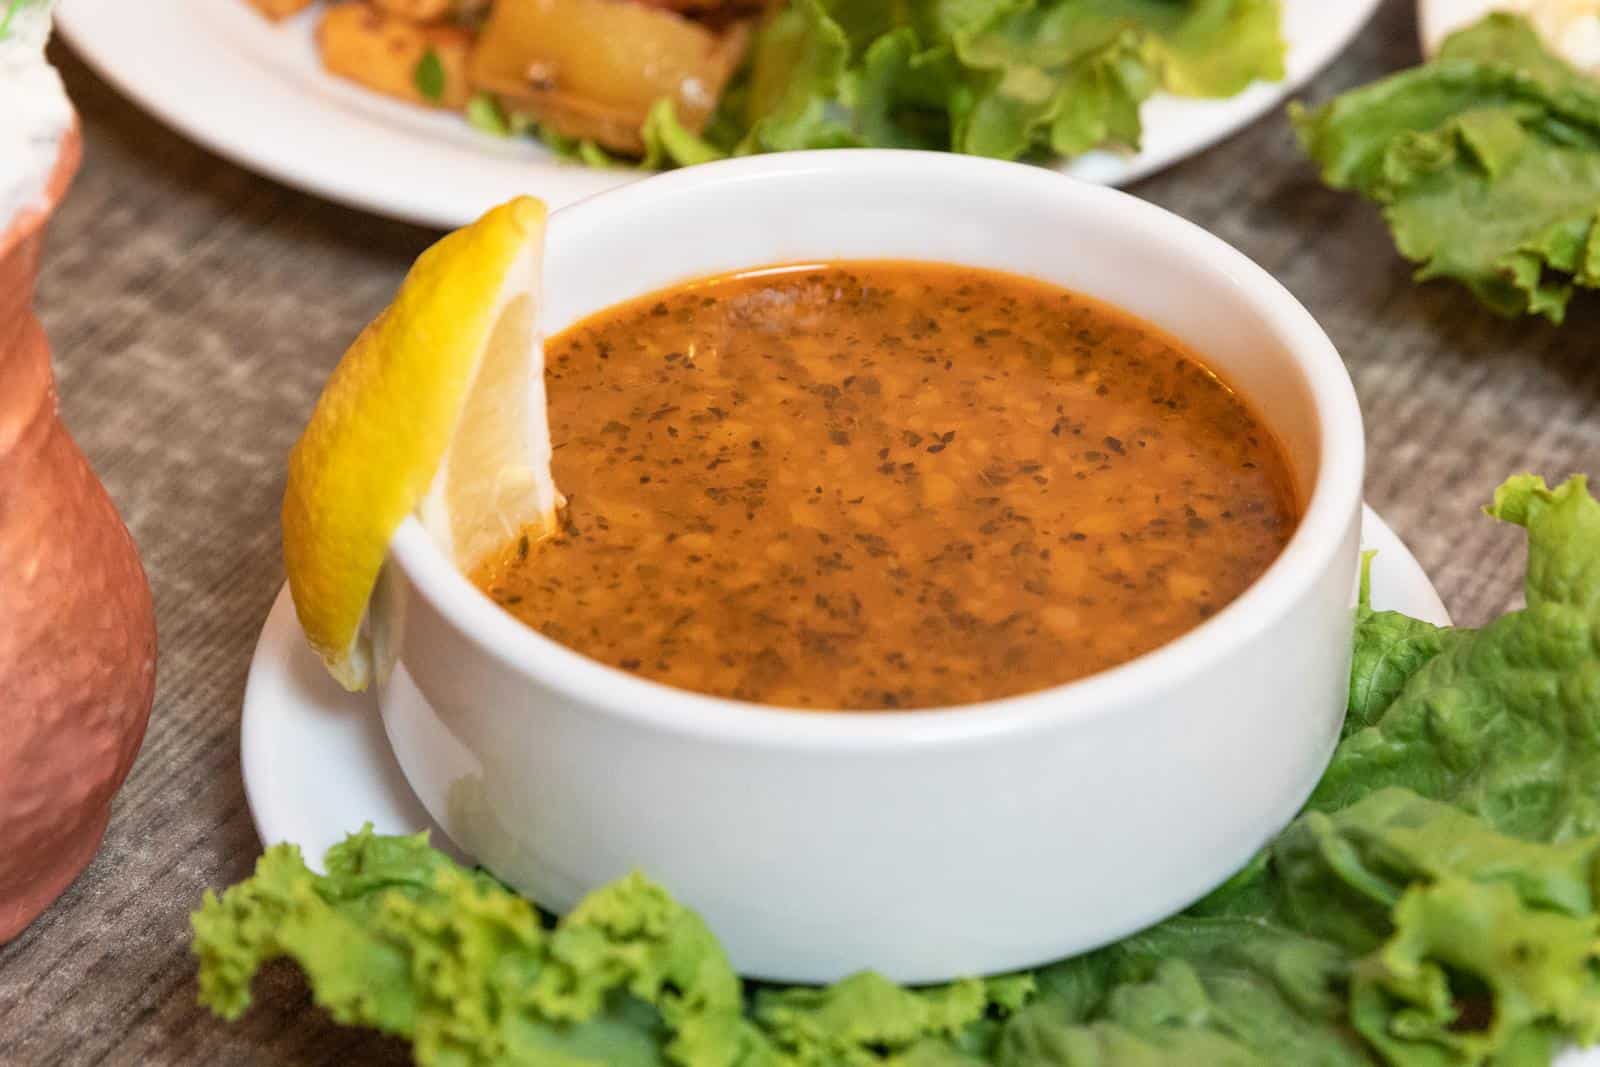 Yellow Lentil Soup is a favourite Egyptian Vegetarian Dish